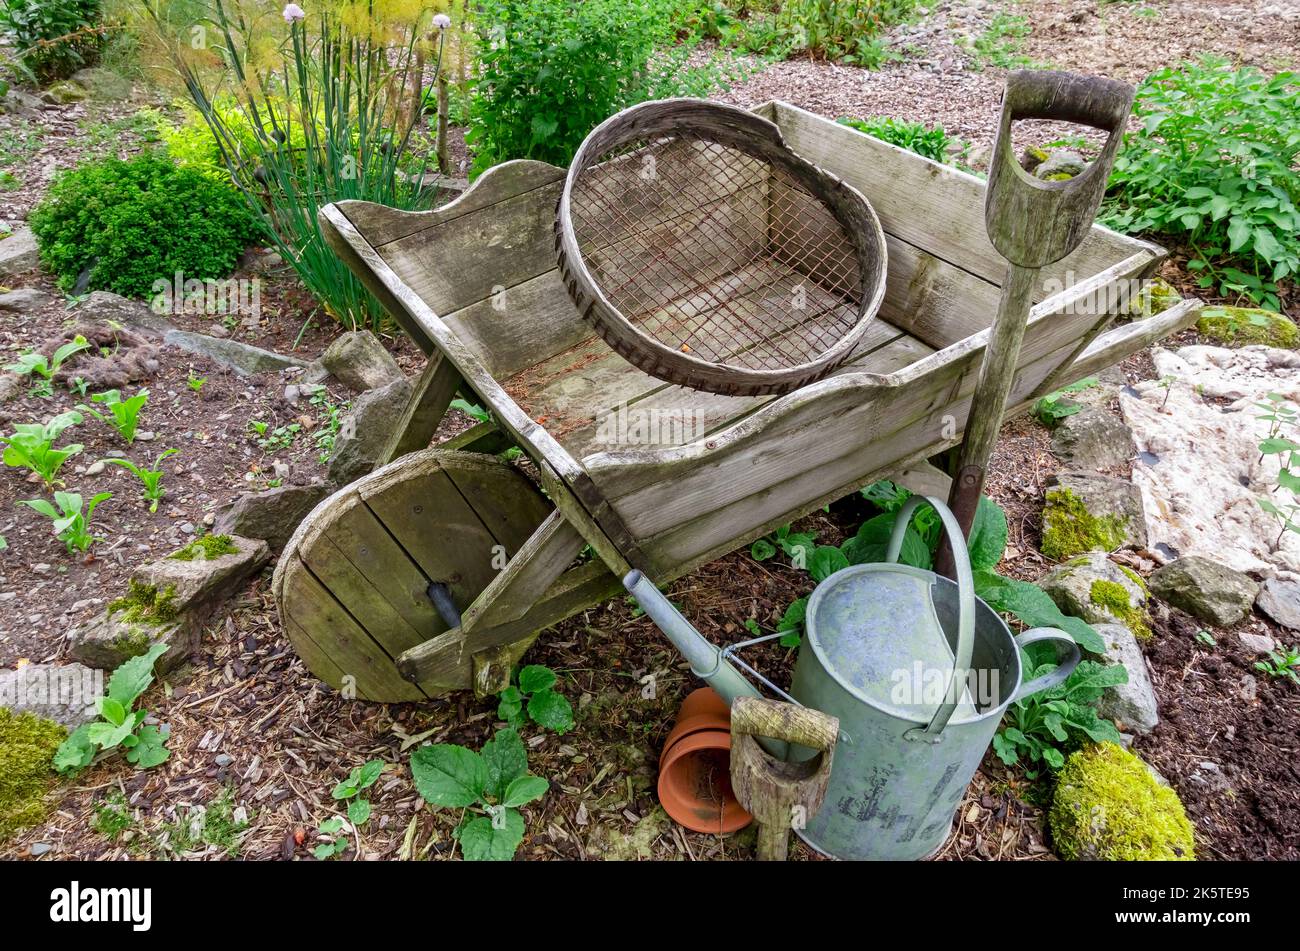 Old wooden wheelbarrow spade sieve watering can and gardening tools on a vegetable garden allotment England UK United Kingdom GB Great Britain Stock Photo